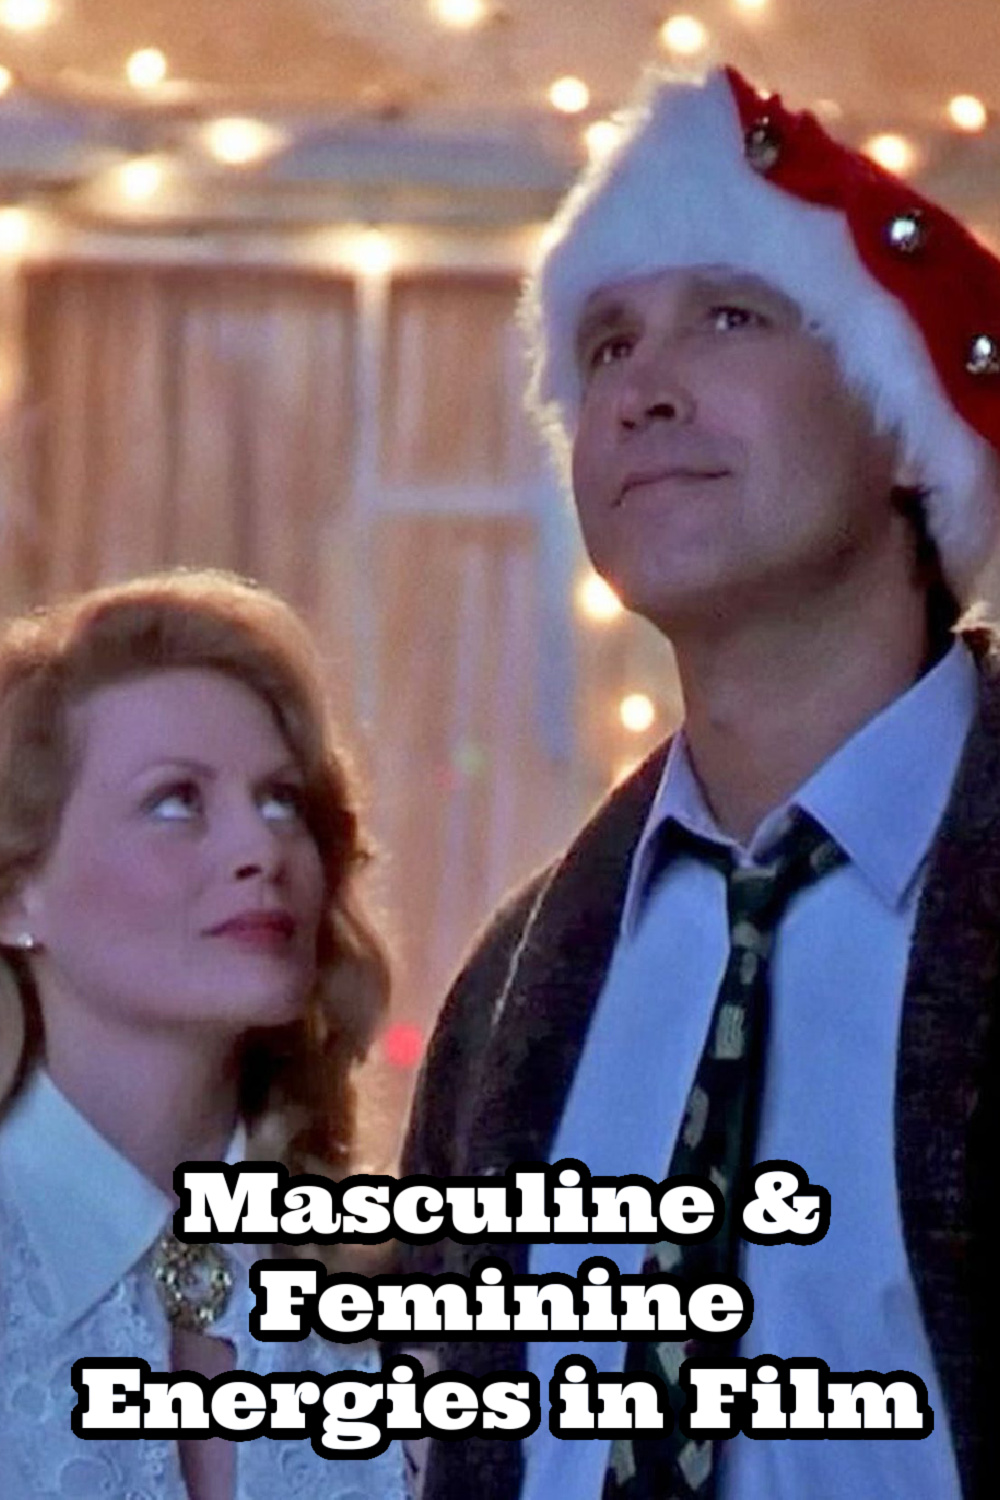 The Dumb Dad Stereotype & Man Child Husbands in National Lampoons Christmas Vacation